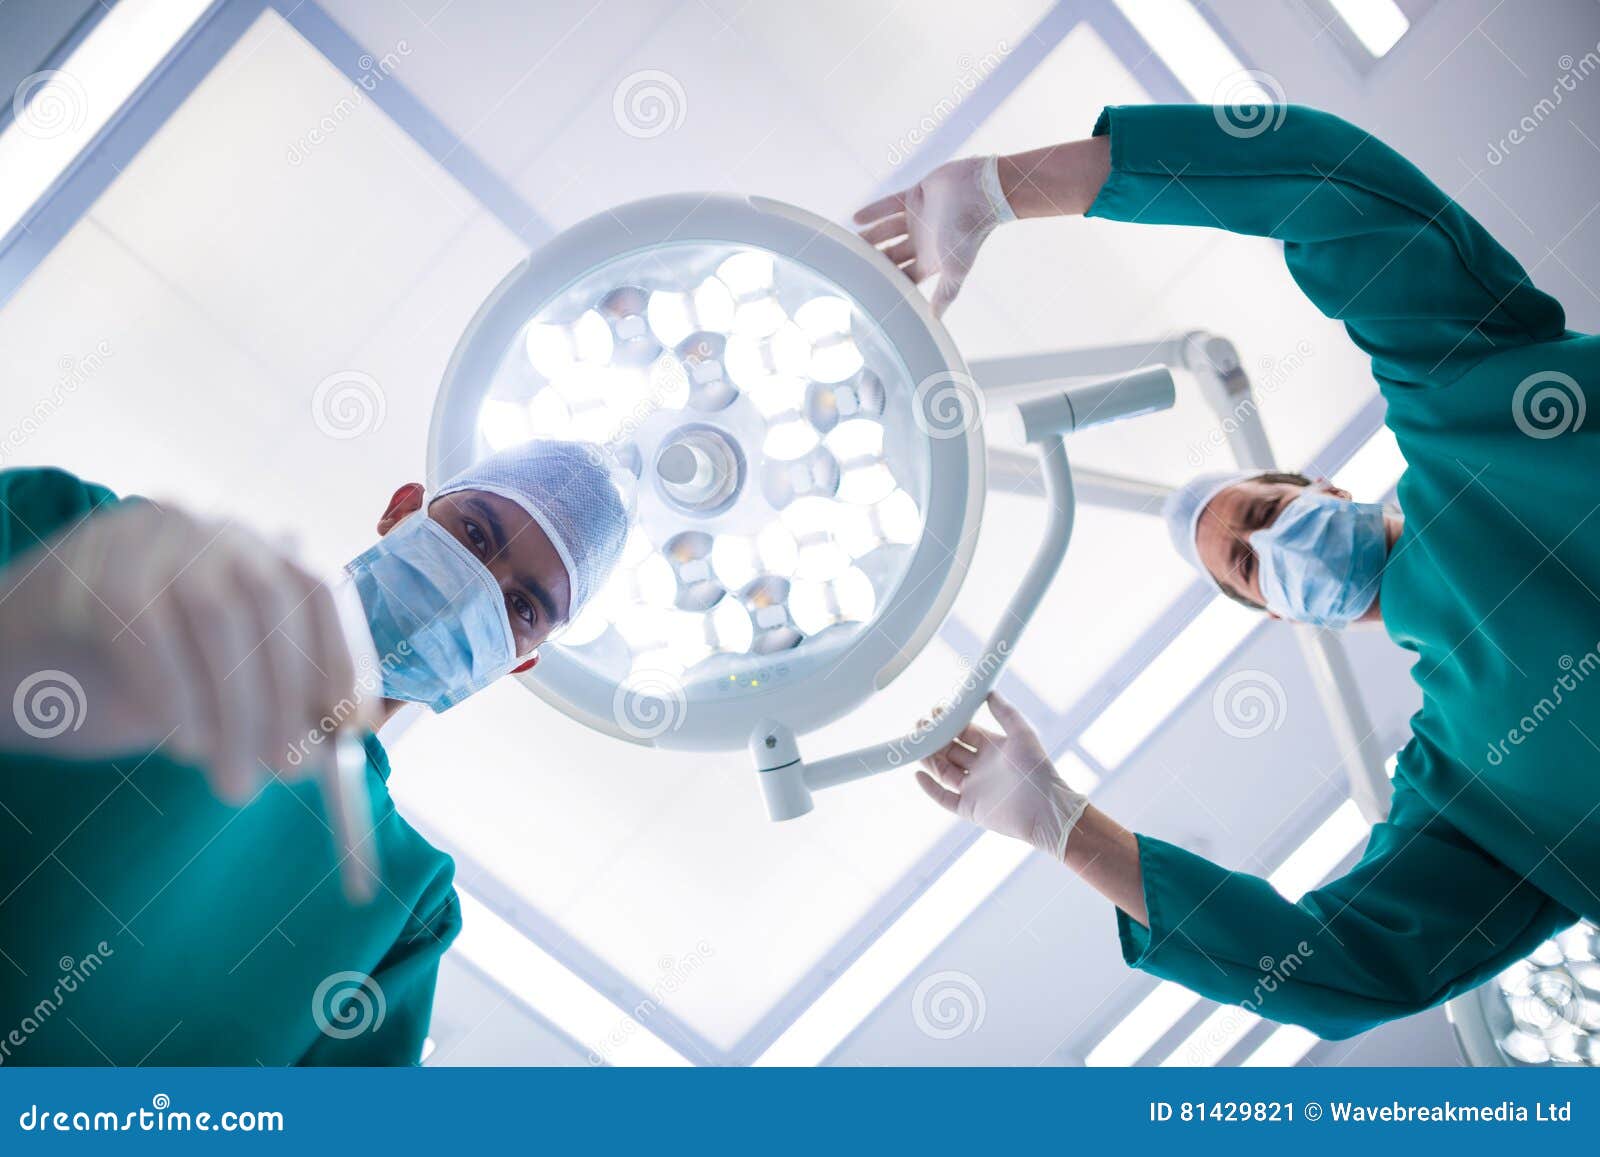 surgeons operating in operation theater